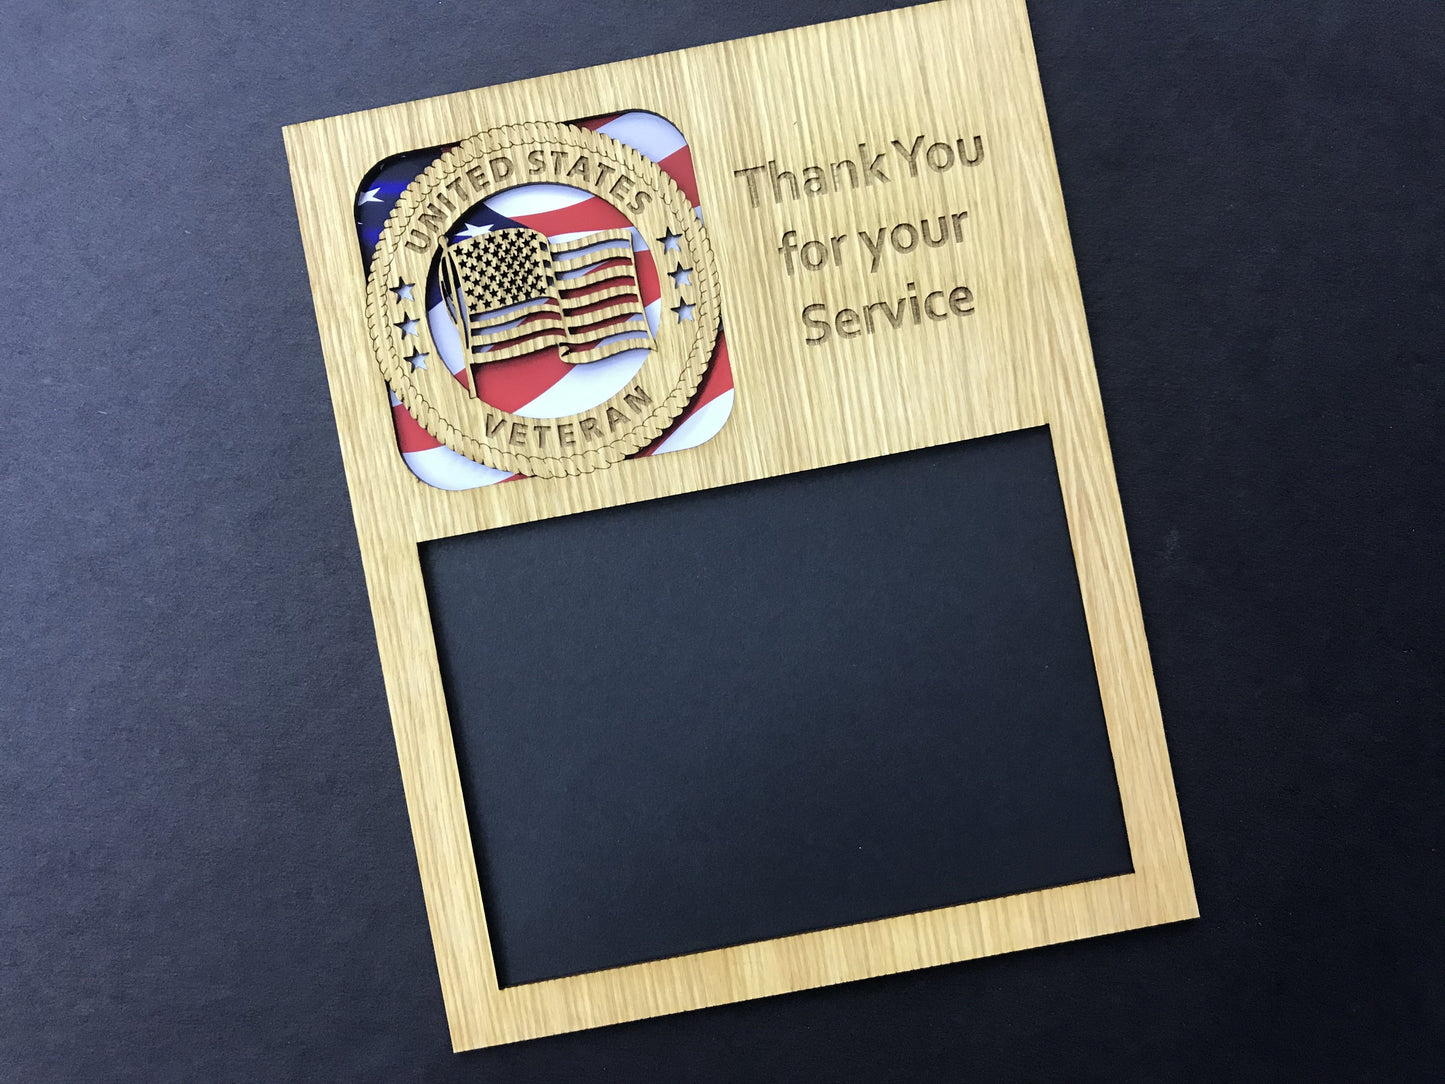 US Veteran Picture Frame - 8x10 Frame Holds a 5x7 Photo